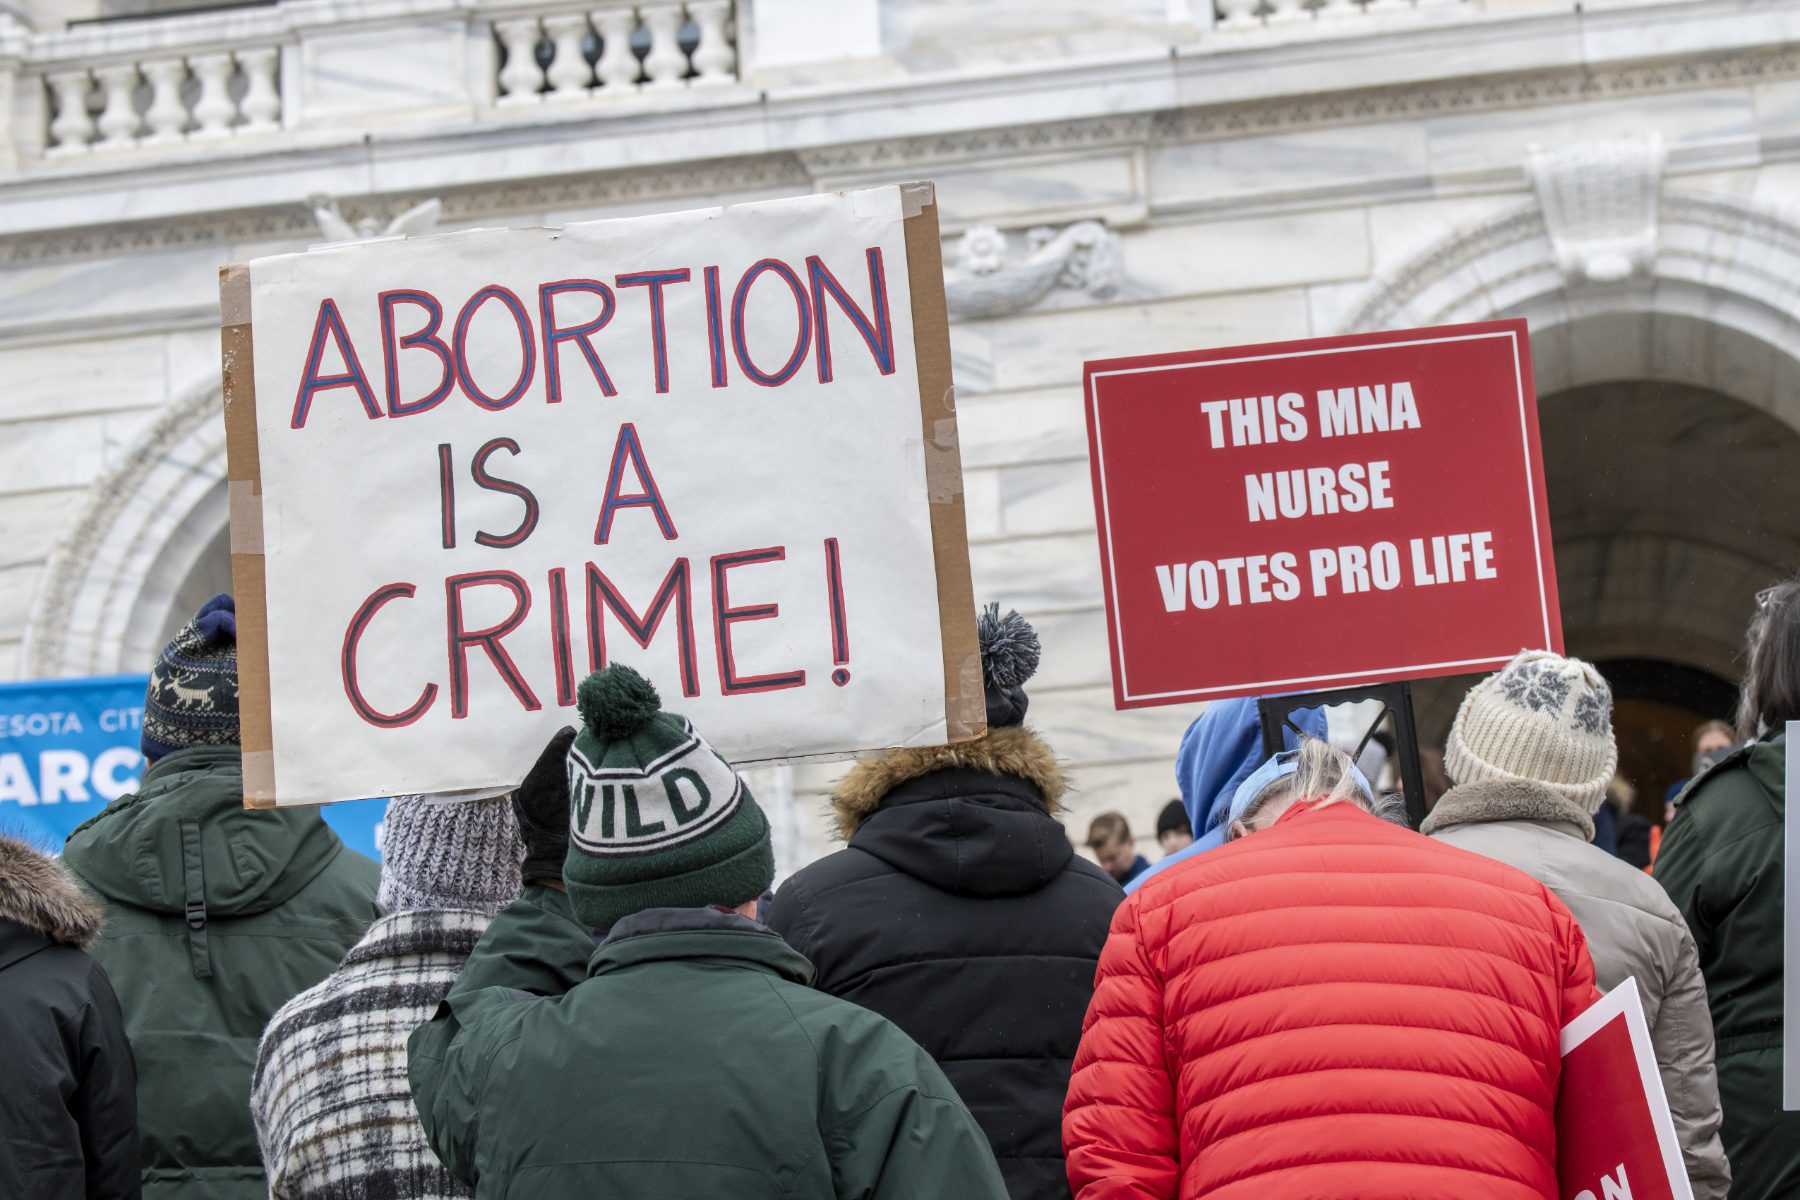 Anti-abortion protesters hold a sign that reads "ABORTION IS A CRIME!"